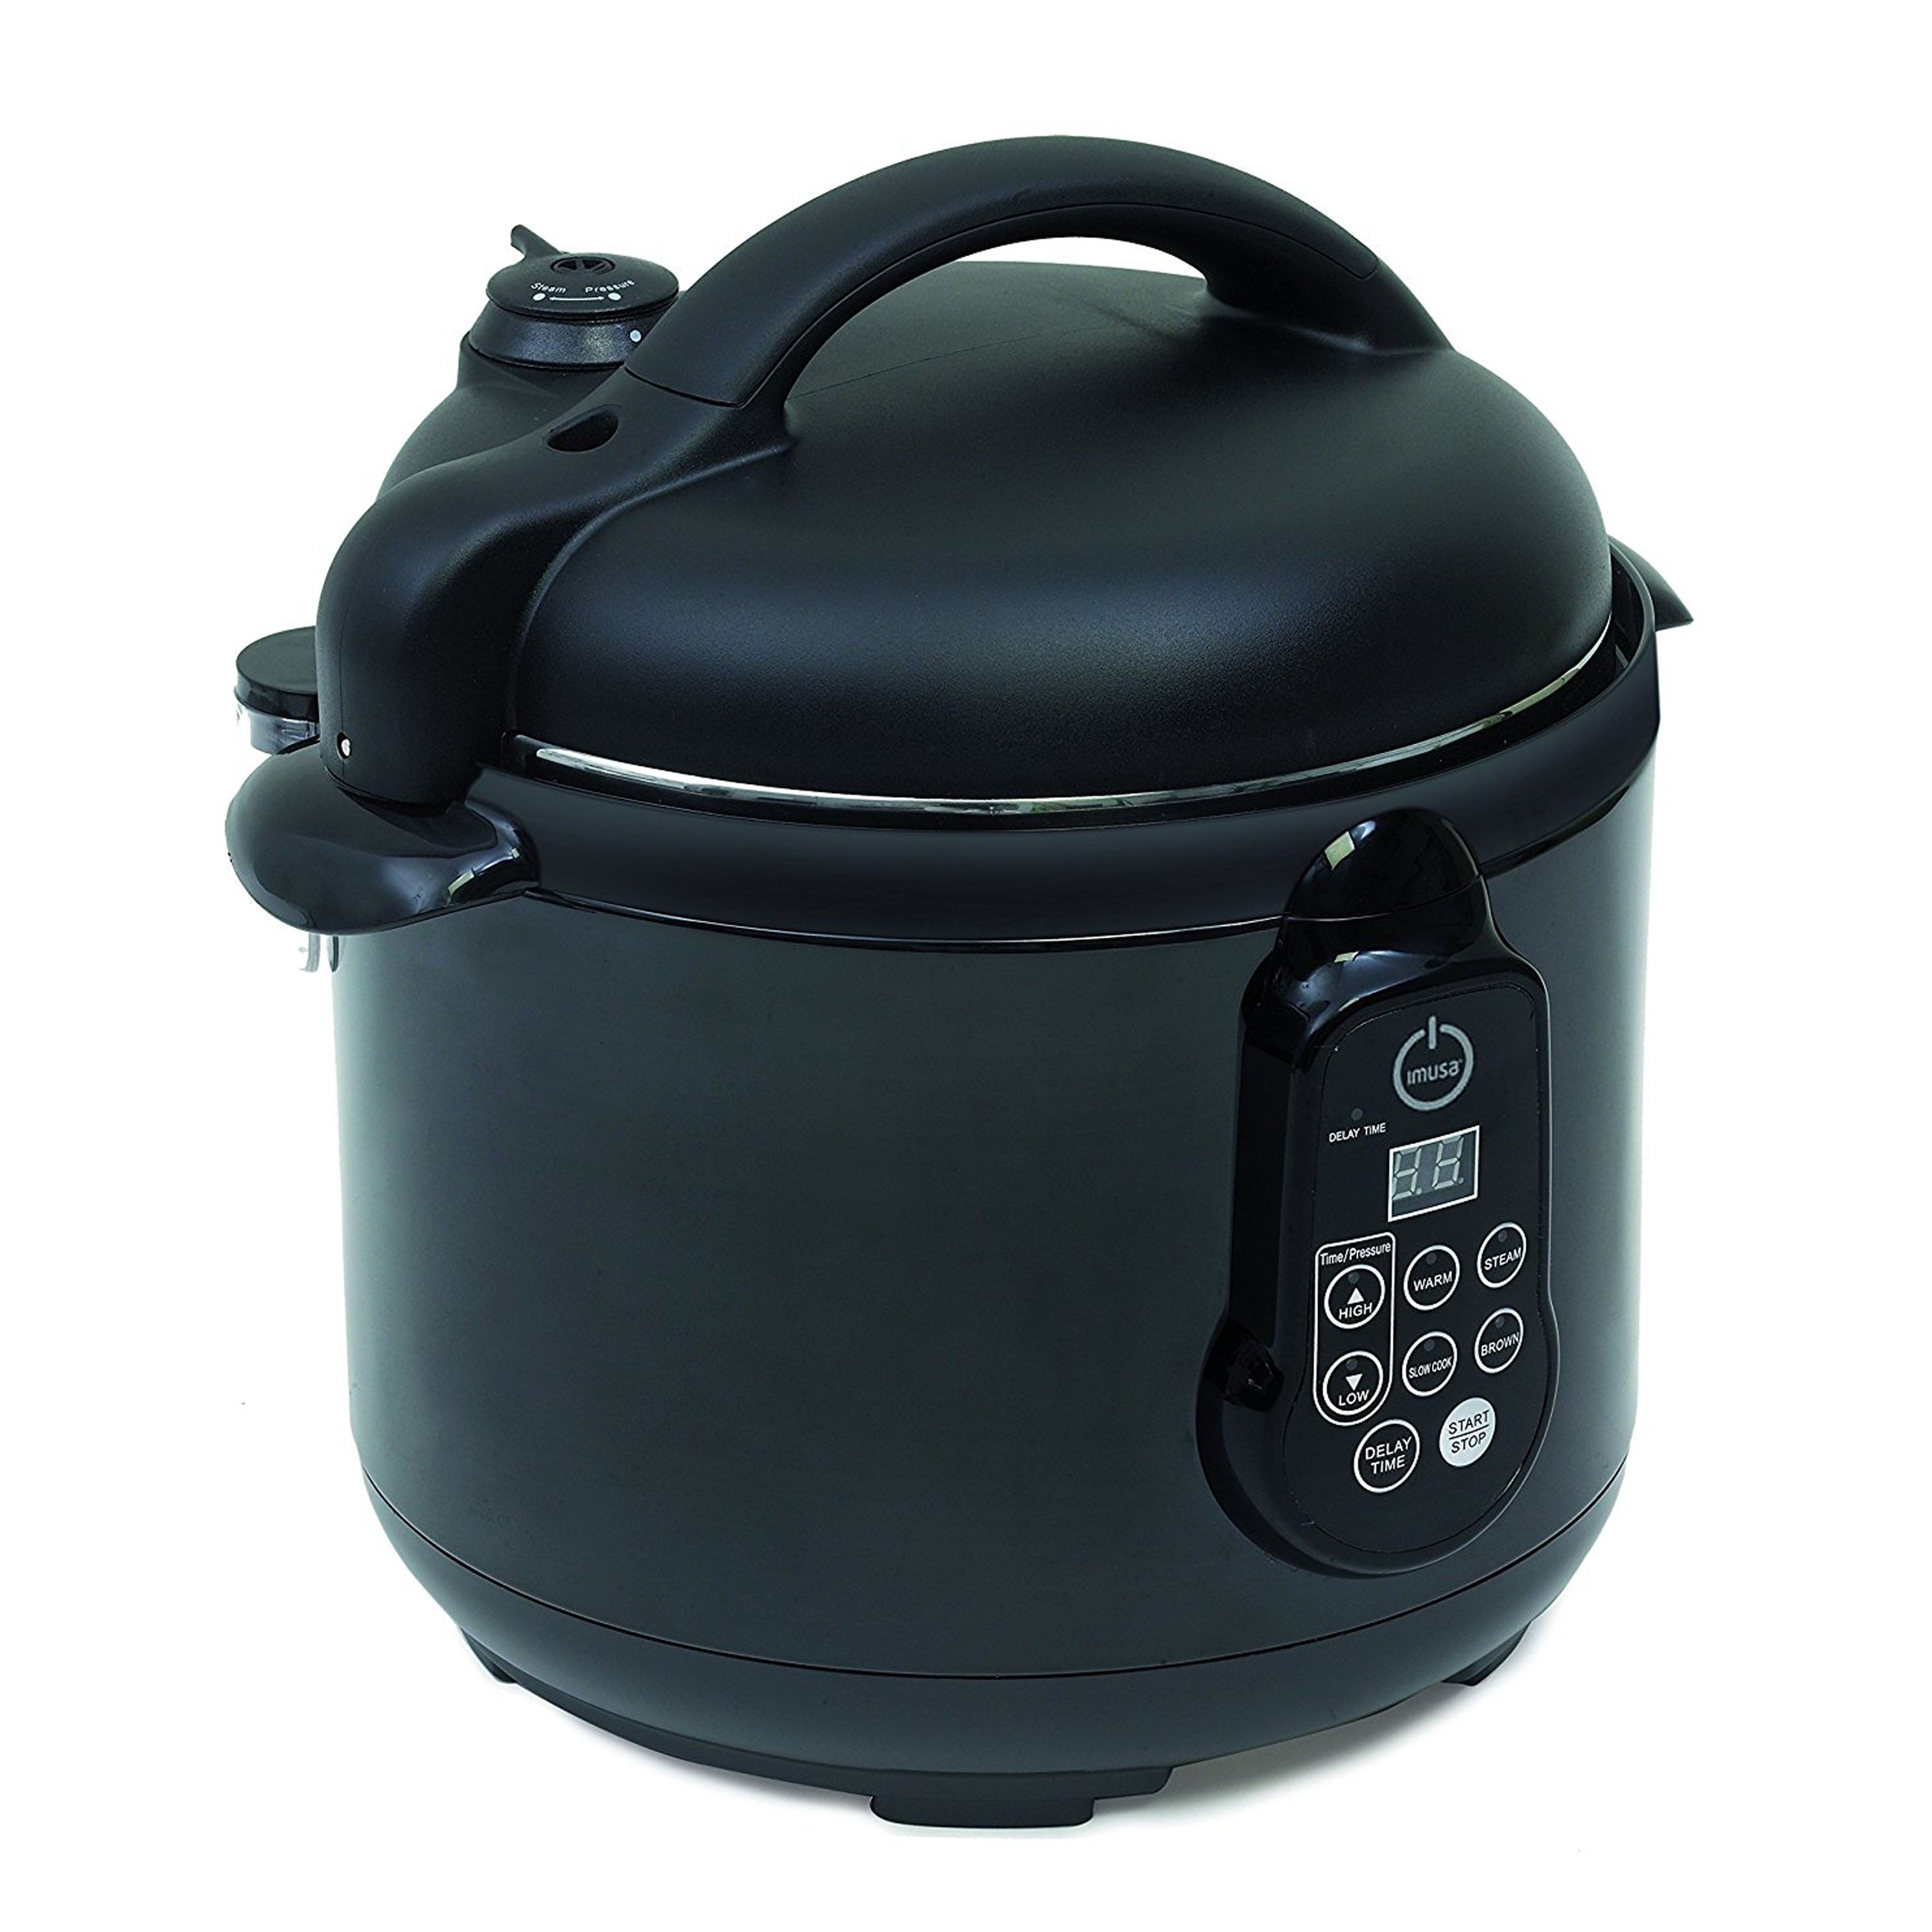 https://hips.hearstapps.com/goodhousekeeping/assets/17/01/1483568633-imusa-electric-pressure-cooker-a417-82501.jpg